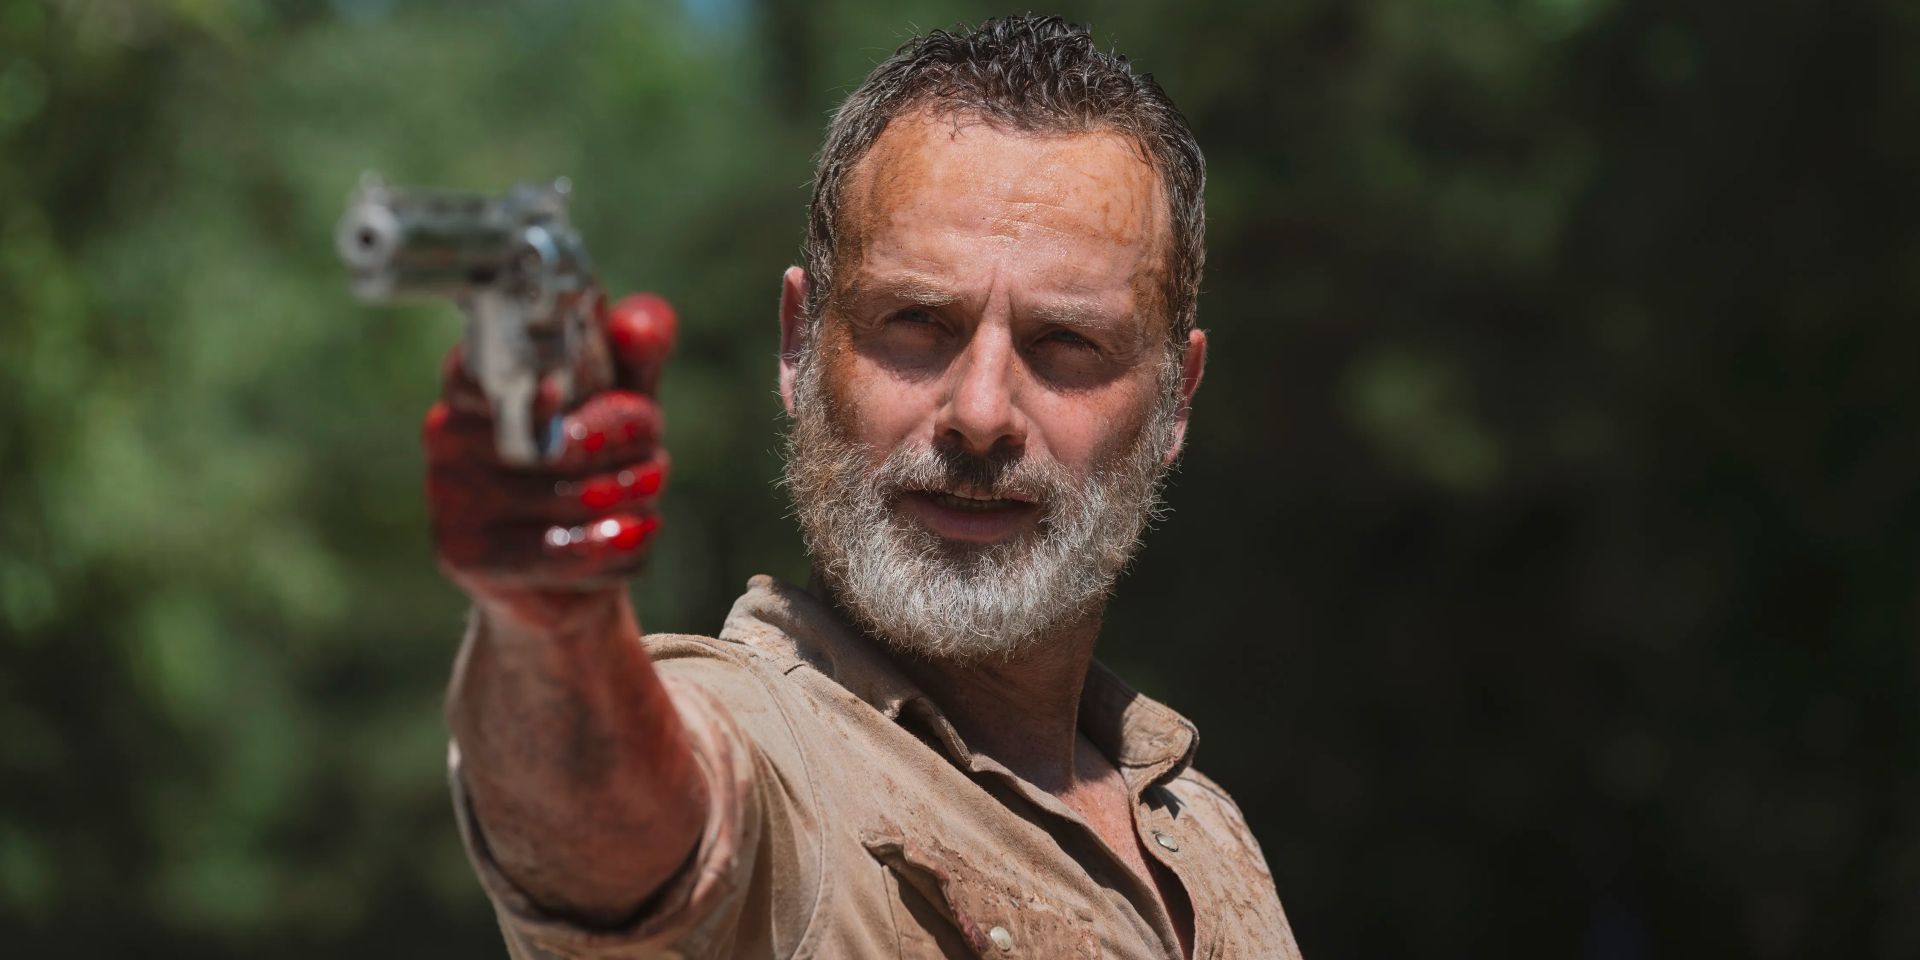 With a bloodied hand, an aged Rick Grimes aims down the sights of his gun.